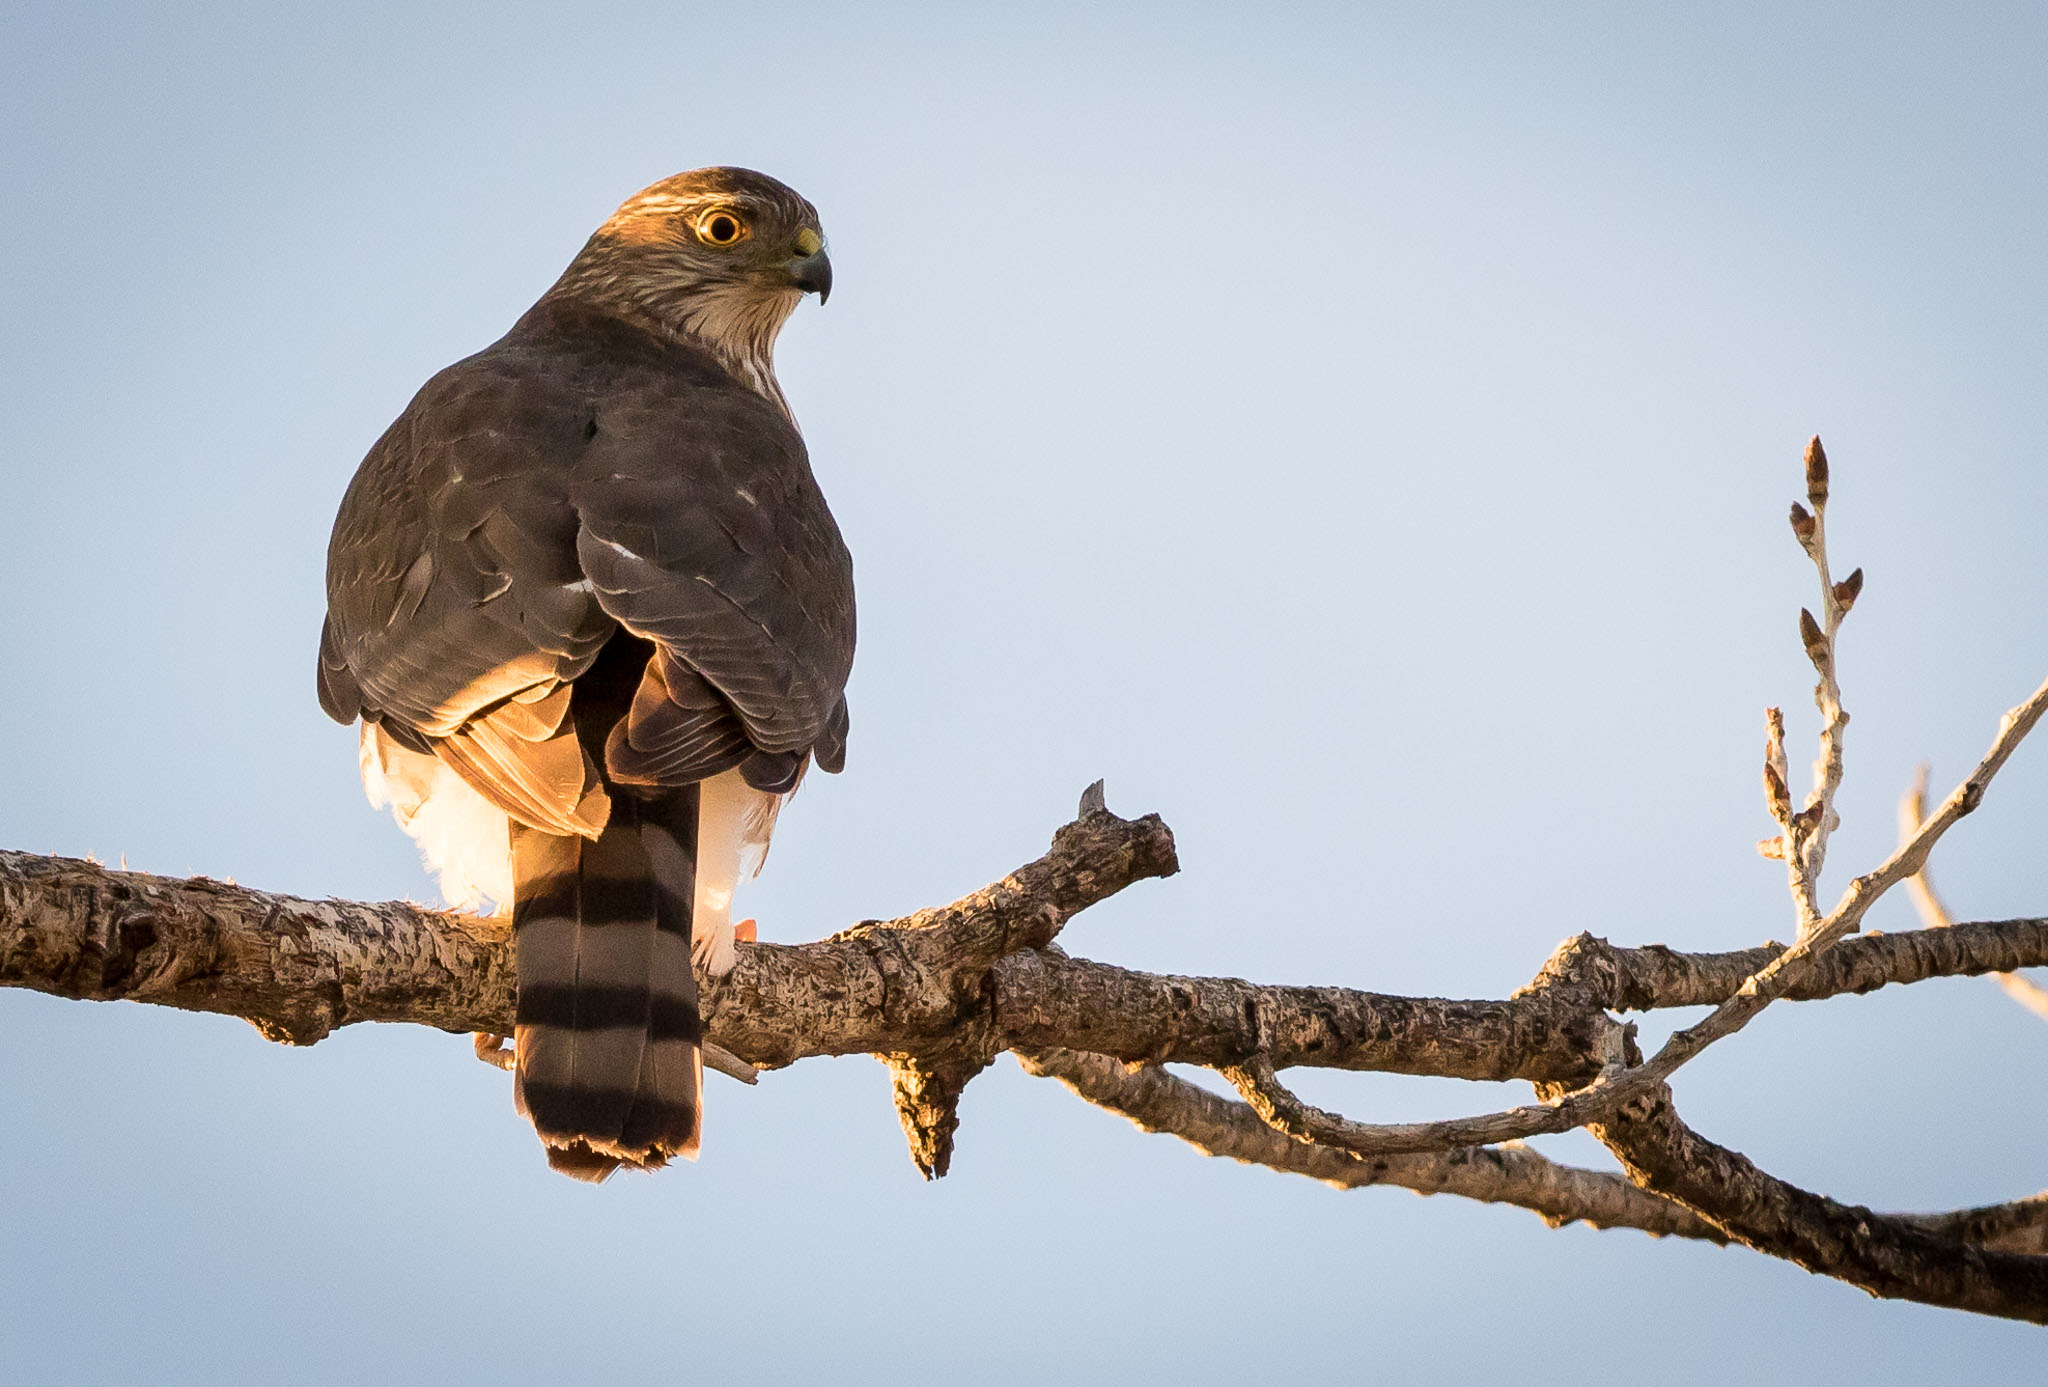 Sharp-shinned Hawk perched on a cottonwood branch, Pancho Villa State Park, Columbus NM, February 26, 2015